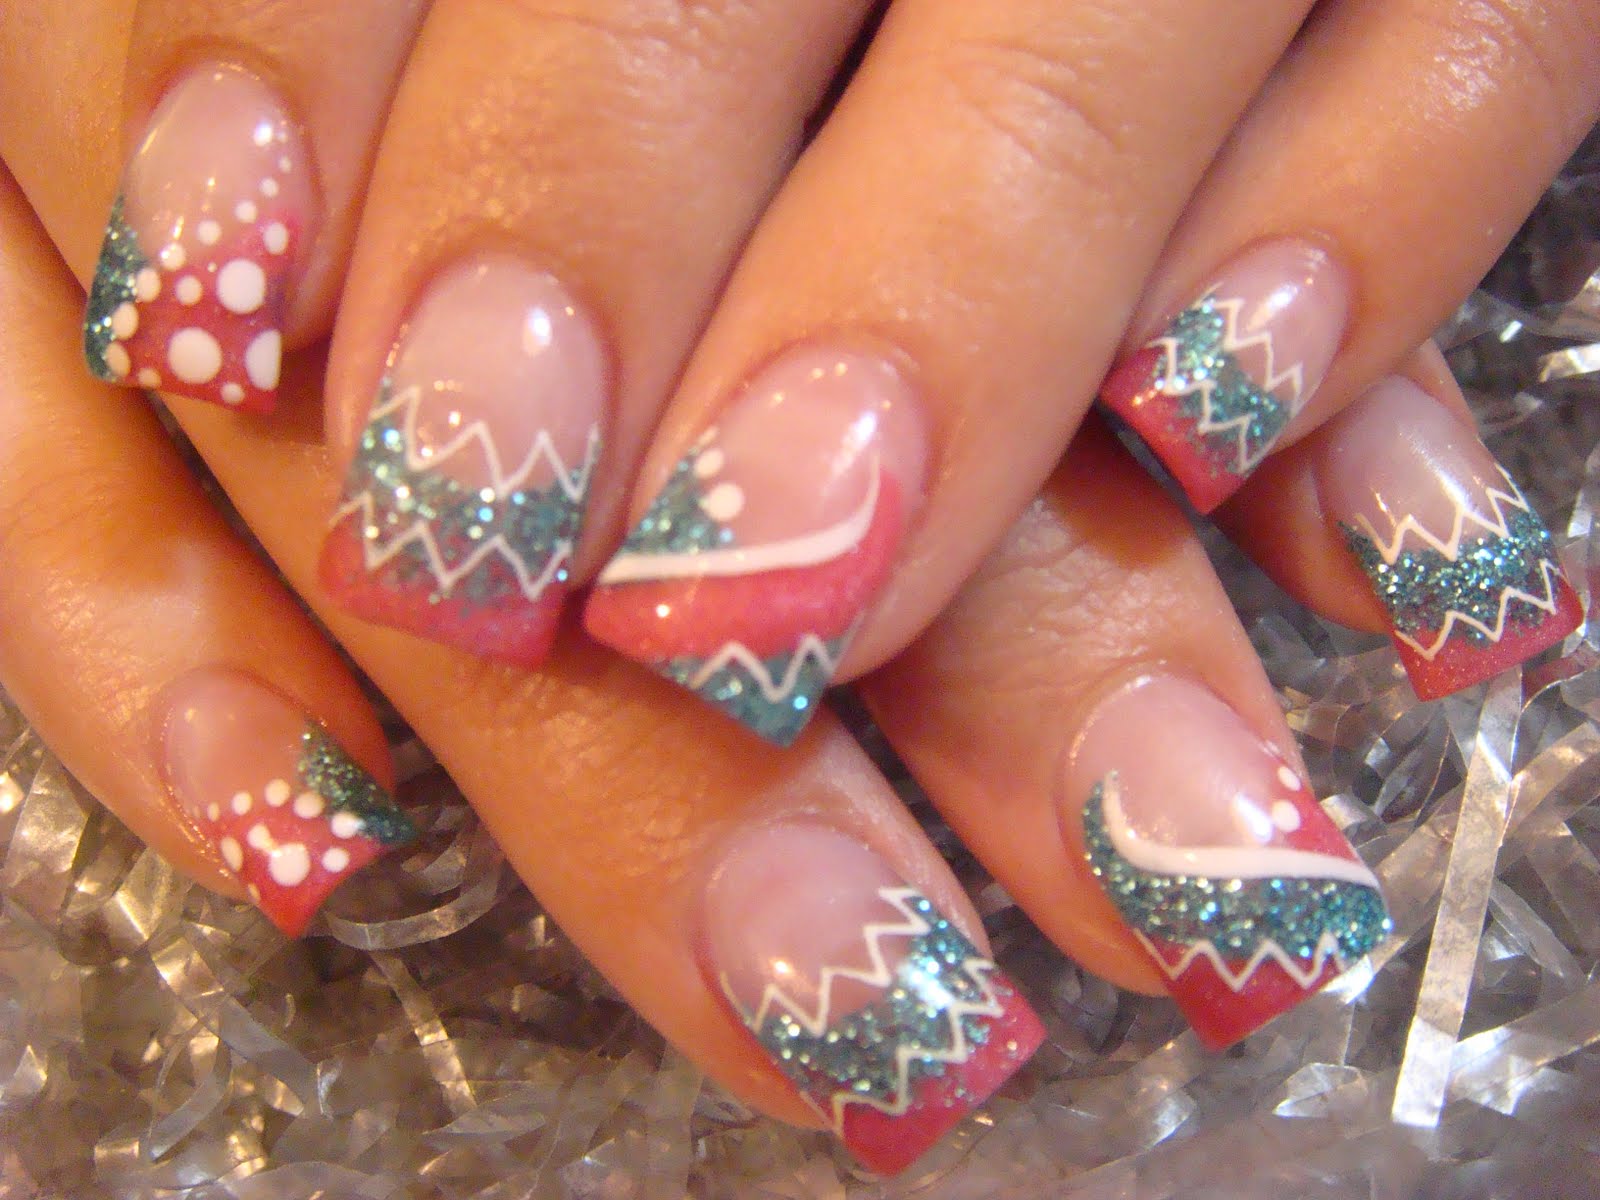 3. "10 Beautiful Spring Nail Designs with Flowers" - wide 11